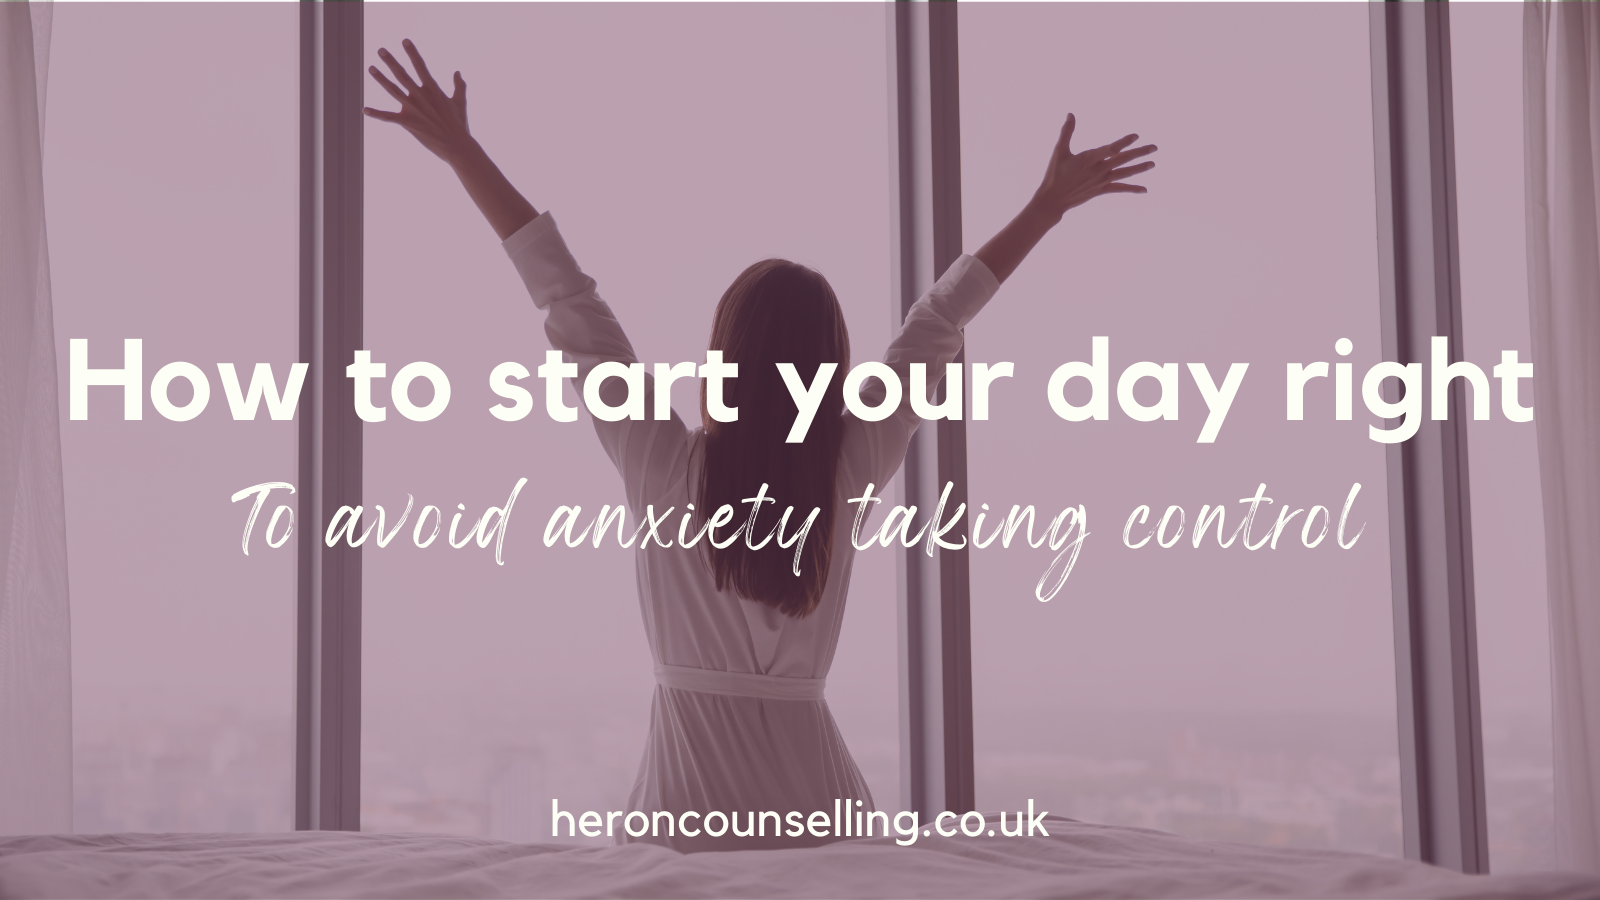 How to start your day right (to avoid anxiety taking control)